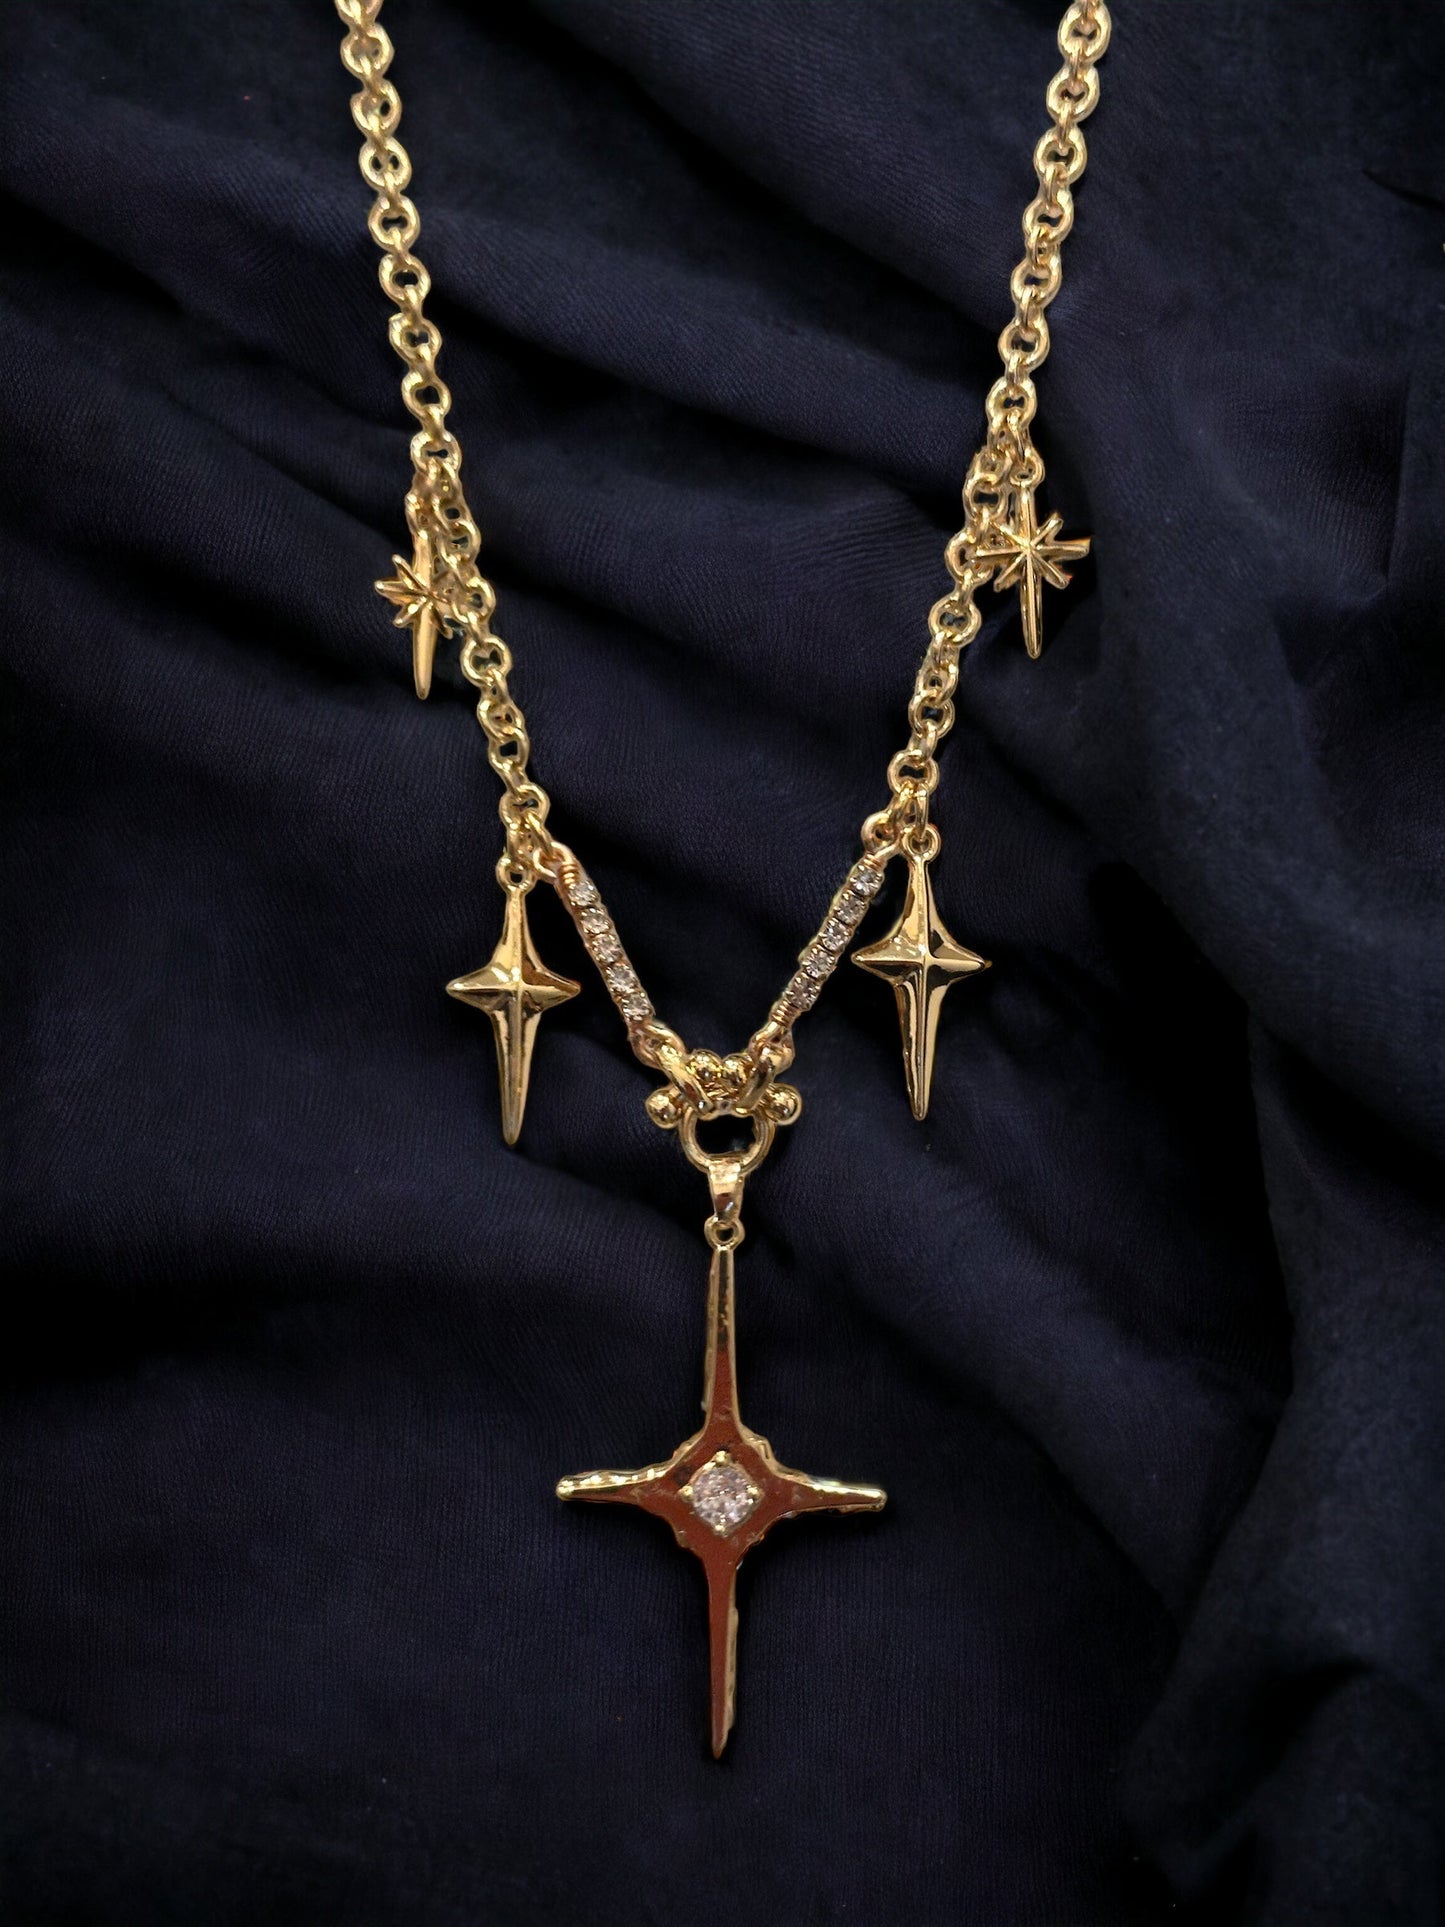 North Star Necklace | Minh Atelier - Jewelry - 18k Gold